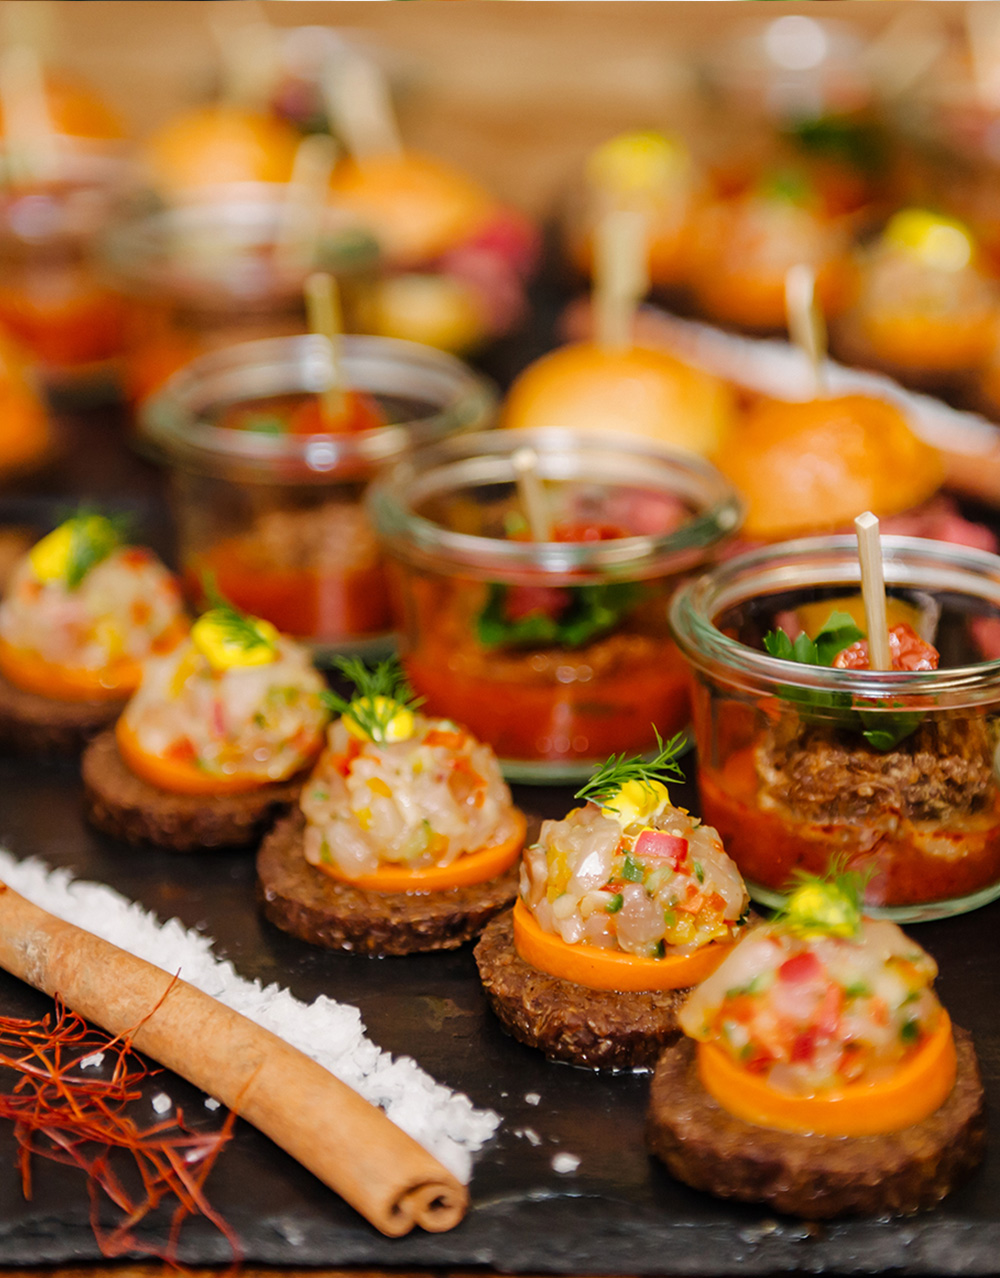 Deli&Co - Event catering and hospitality service. Webites coming soon. Contact Us.